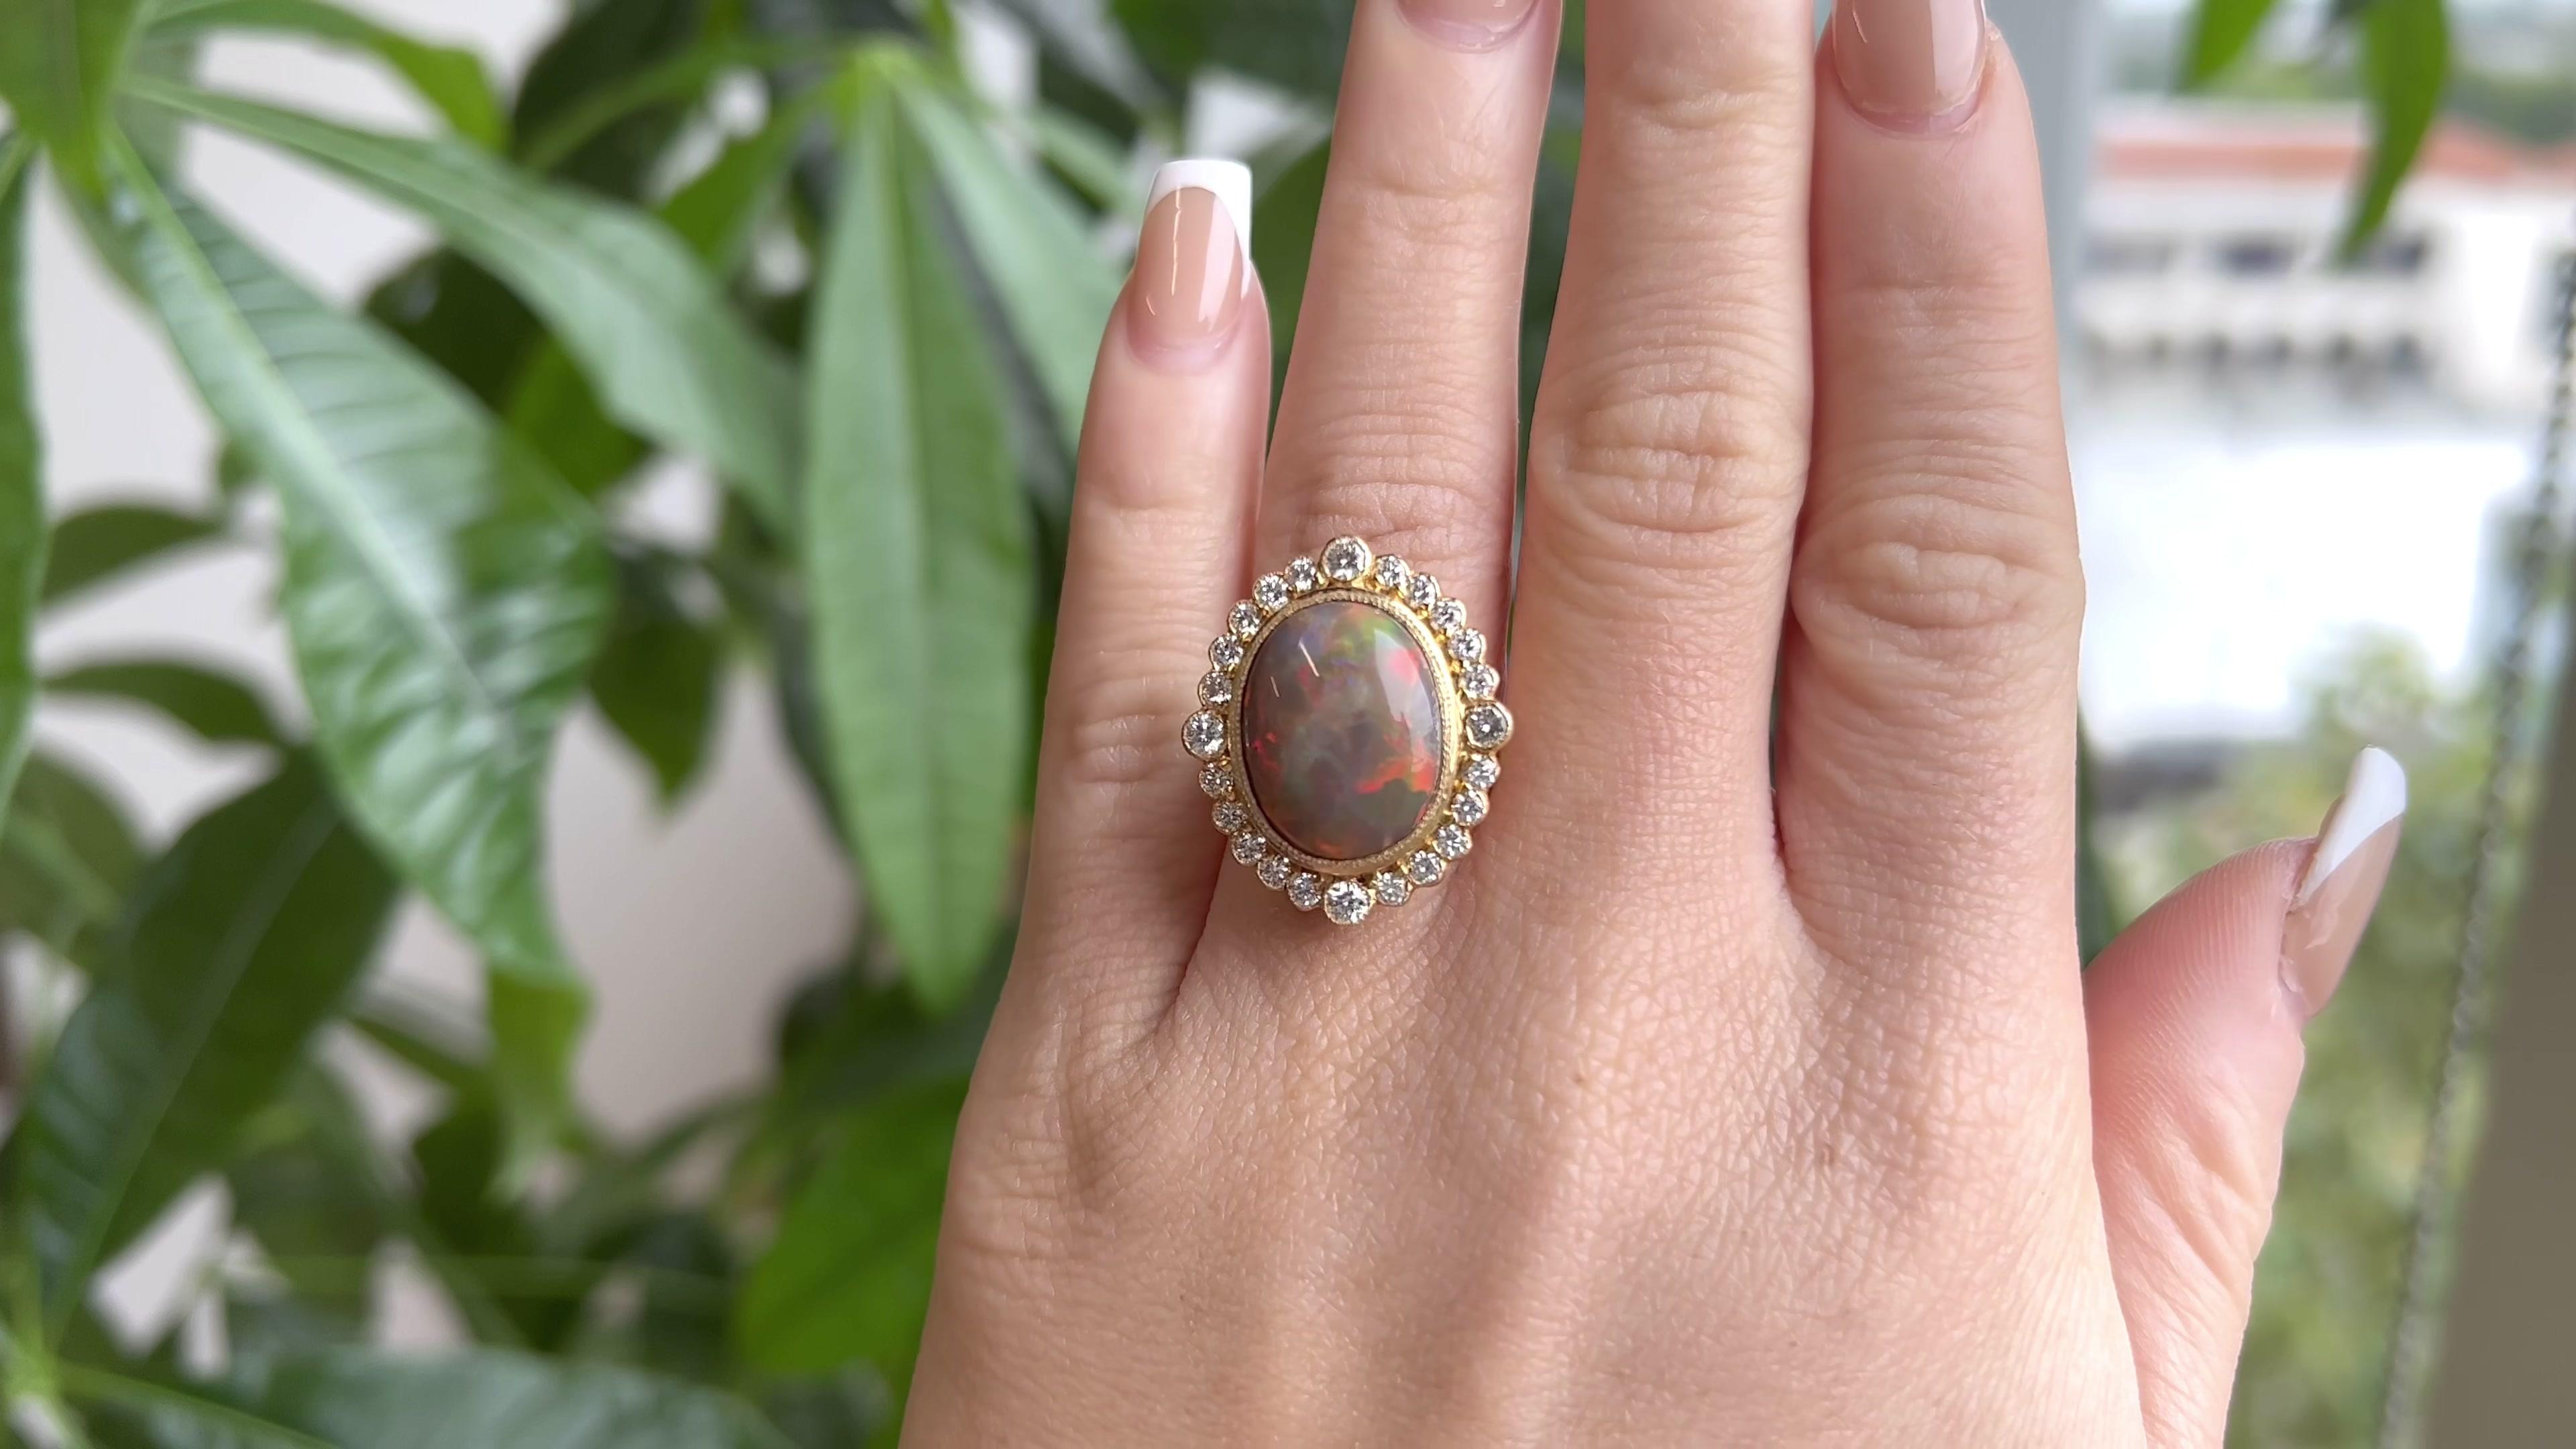 One Opal Diamond 18 Karat Gold Cocktail Ring. Featuring one oval opal of approximately 8.00 carats. Accented by 24 round brilliant cut diamonds with a total weight of approximately 1.00 carats, graded H color, SI clarity. Crafted in 18 karat yellow